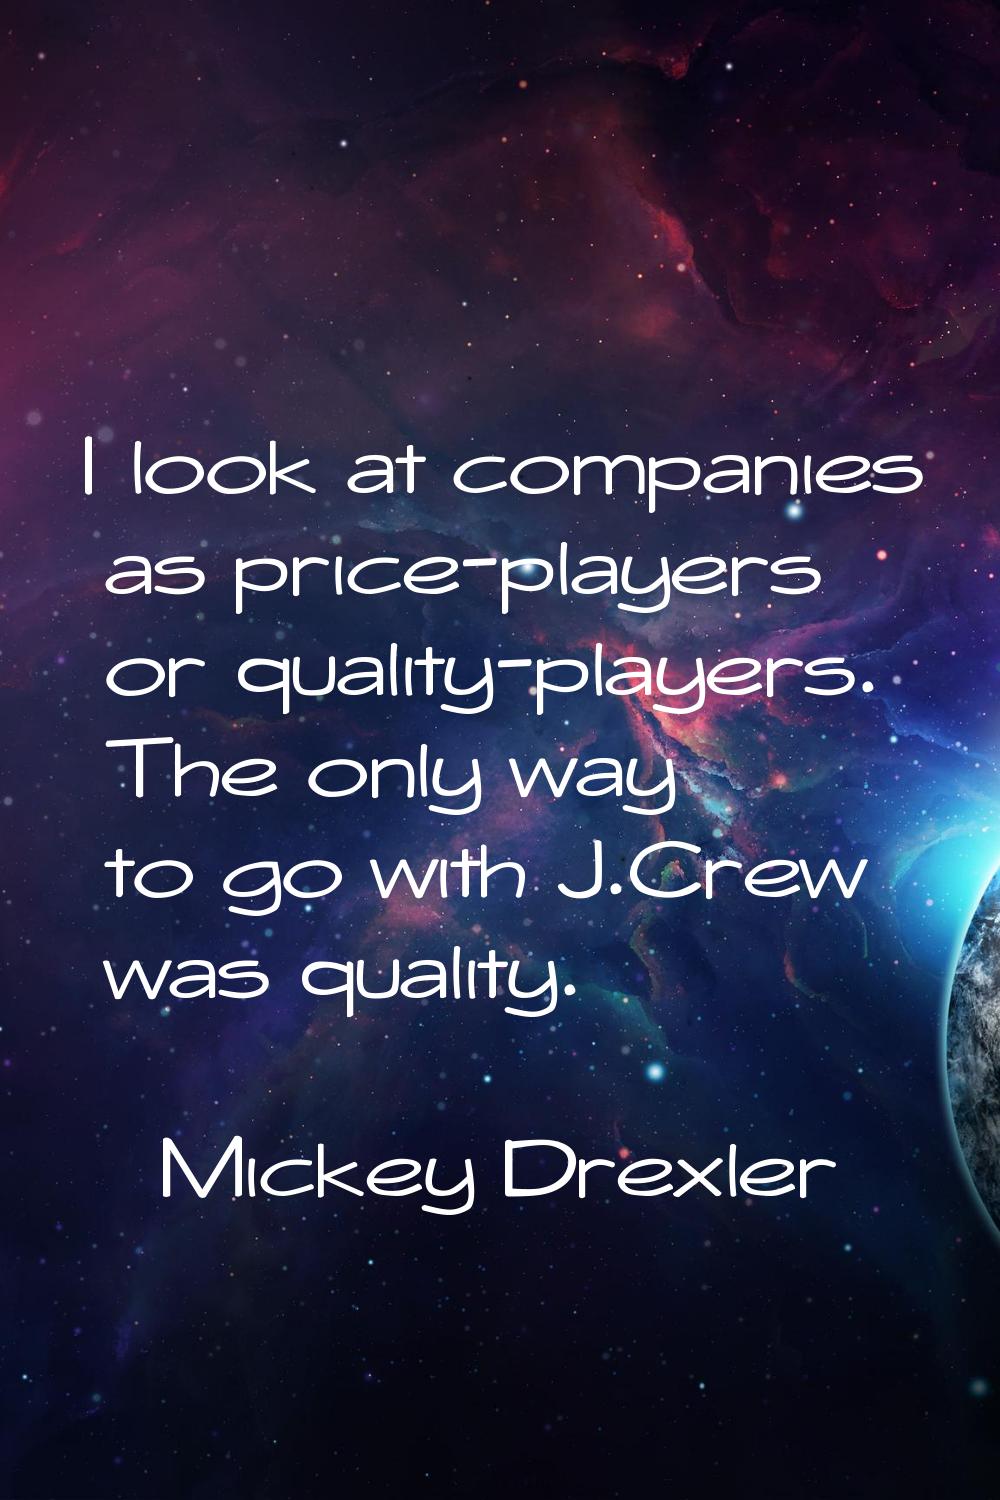 I look at companies as price-players or quality-players. The only way to go with J.Crew was quality